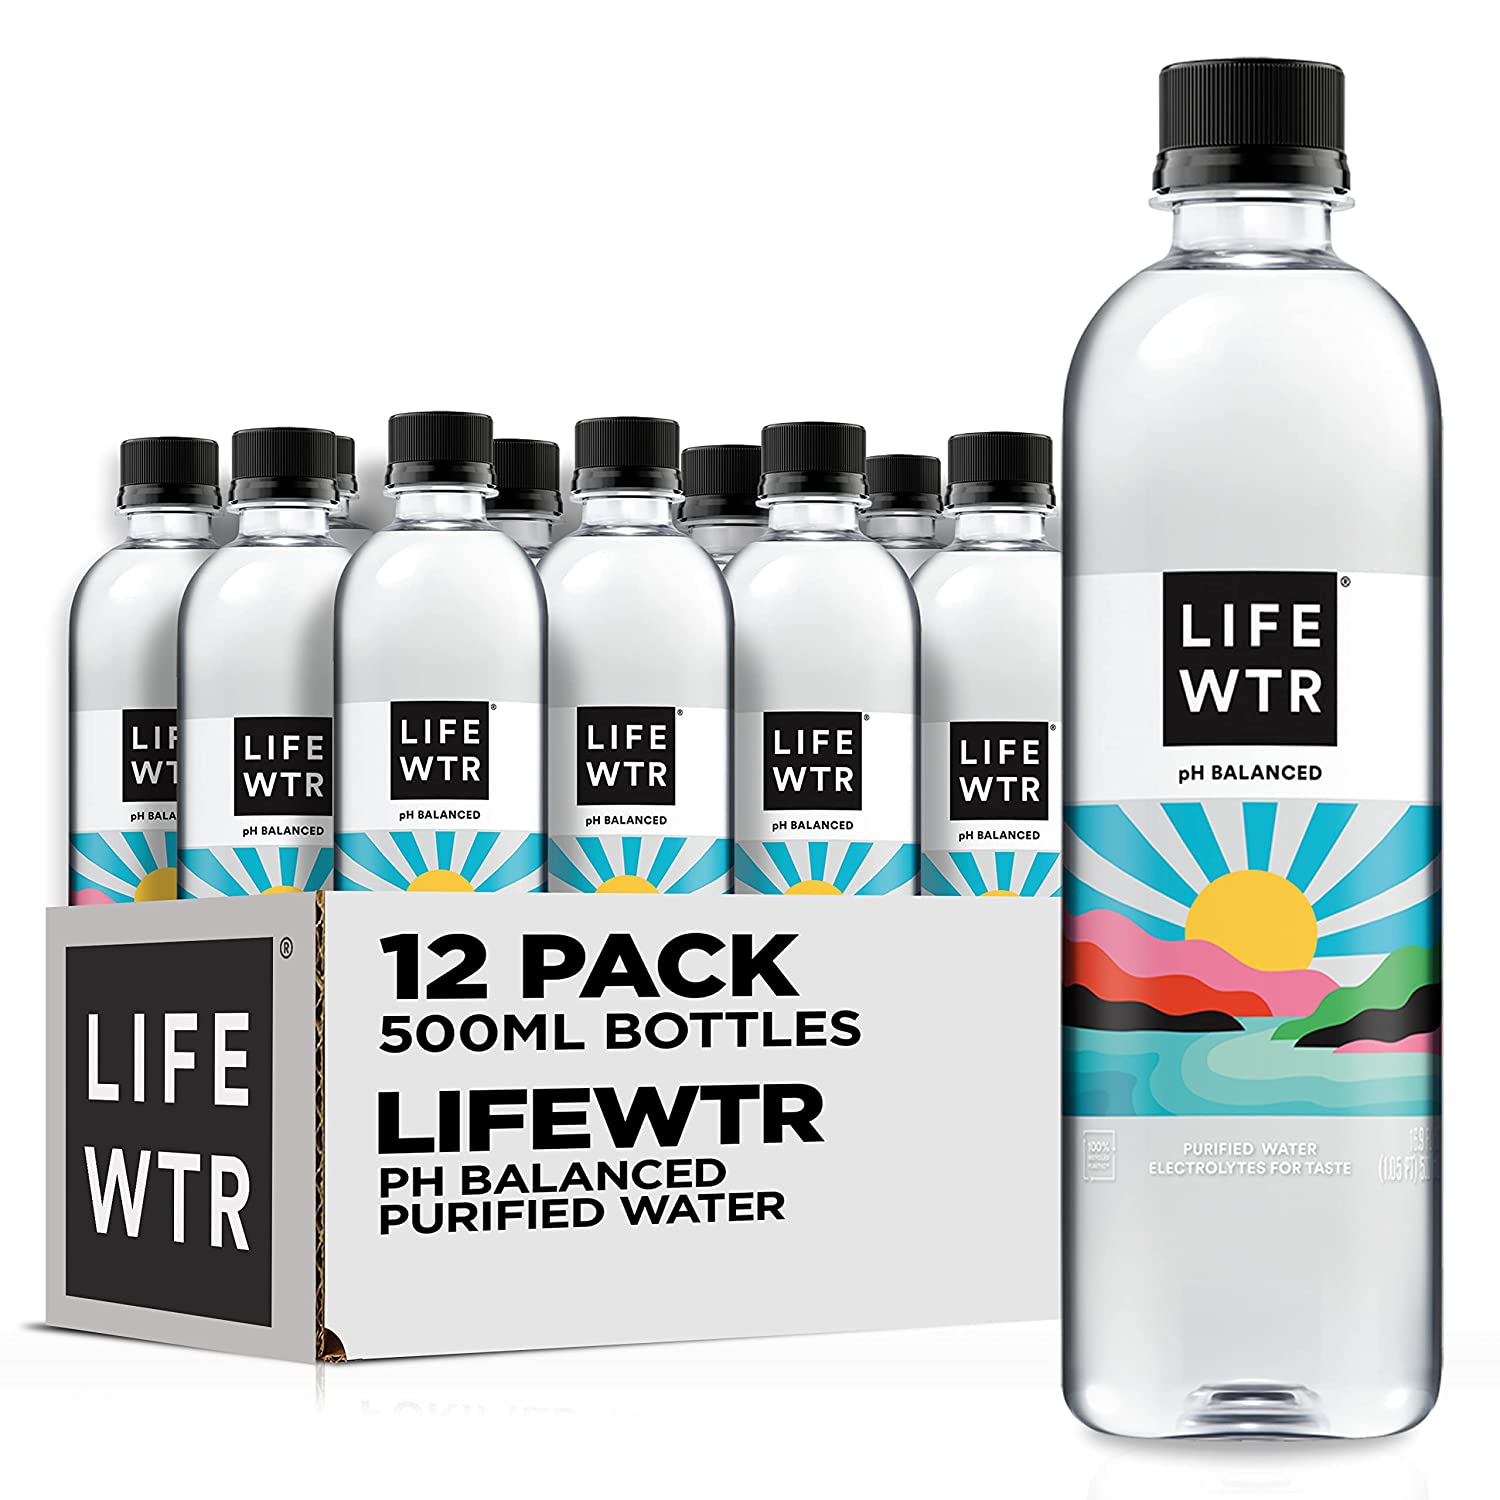 Life Wtr Purified Water Less Than A Buck! Stock Up!